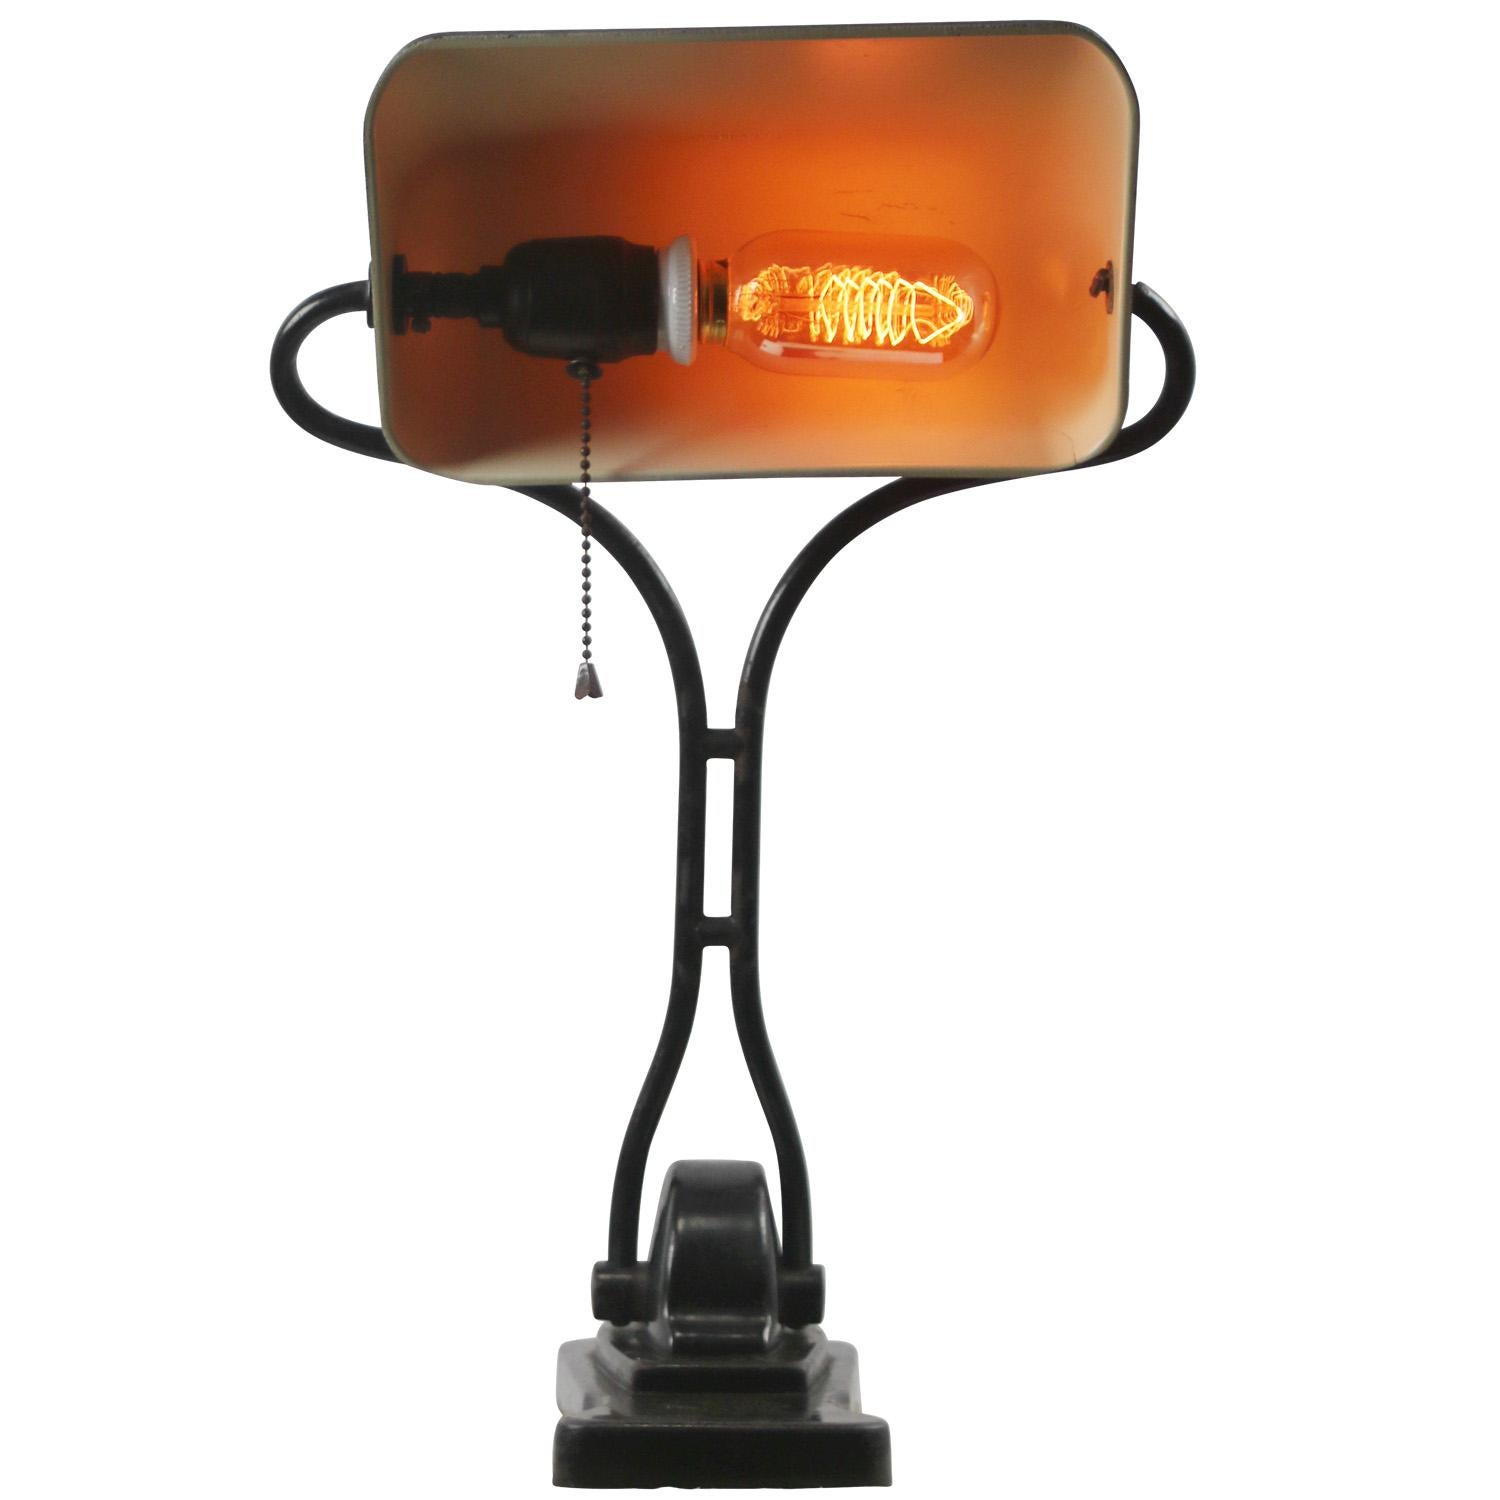 Black Bakelite metal desk light / banker’s lamp
2,5 meter black cotton flex, plug and pull switch 

Also available with US/UK plug

Weight: 3.10 kg / 6.8 lb

Priced per individual item. All lamps have been made suitable by international standards